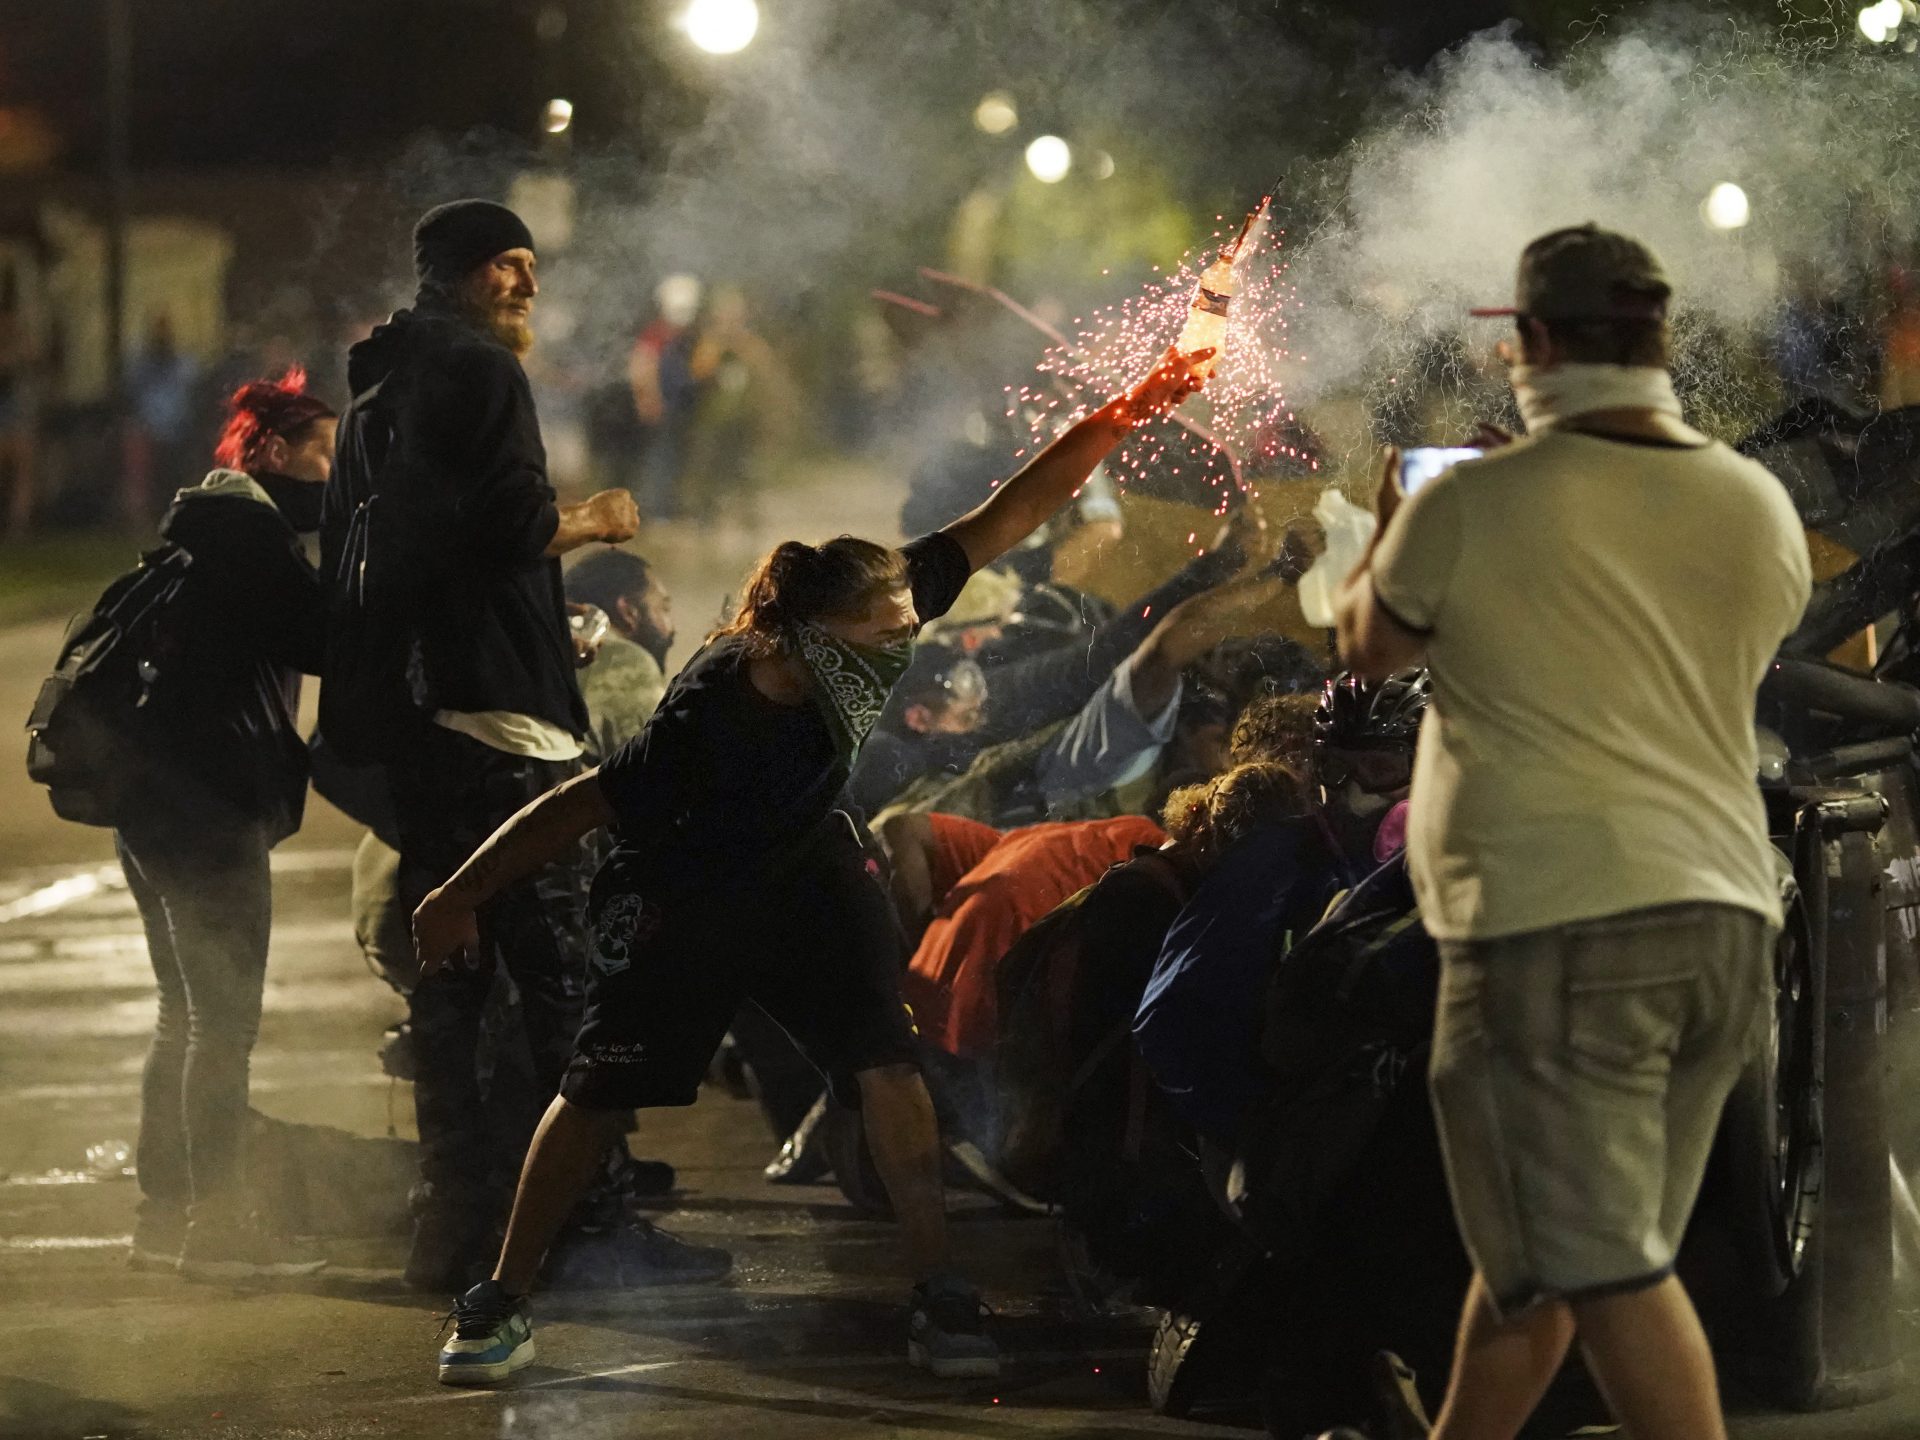 A protester tosses an object toward police during clashes outside the Kenosha County Courthouse late Tuesday, Aug. 25, 2020, in Kenosha, Wis., on third night of unrest following the shooting of a Black man, Jacob Blake, whose attorney said he was paralyzed after being shot multiple times by police.